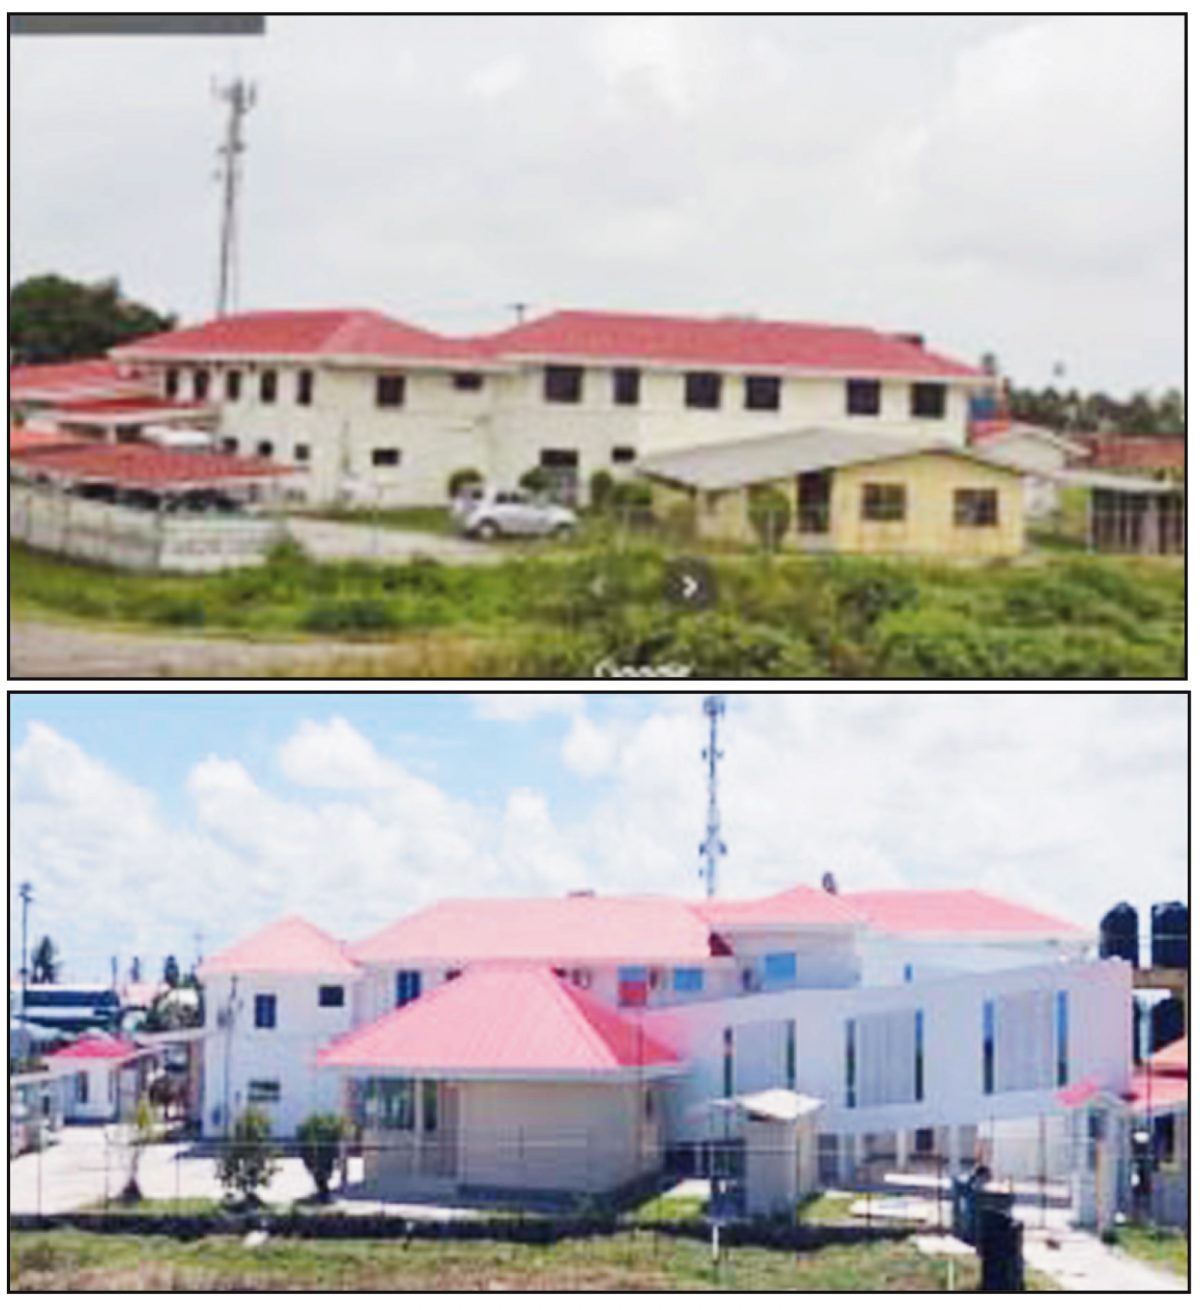 Before and after frontal views of the Leonora Cottage Hospital